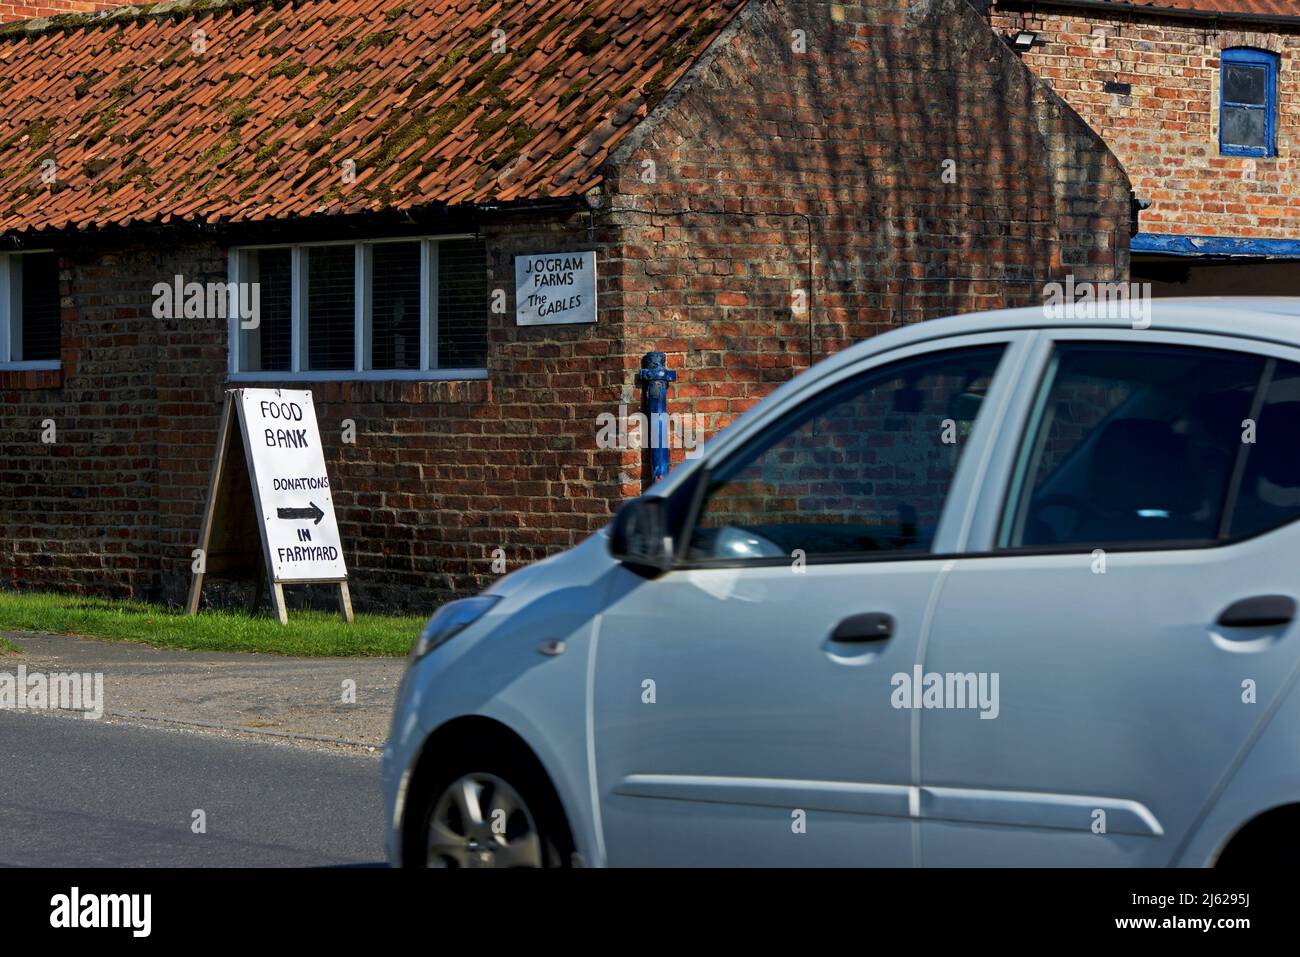 Car passing sign for food bank at farm, in the village of Allerton, East Yorkshire, England UK Stock Photo